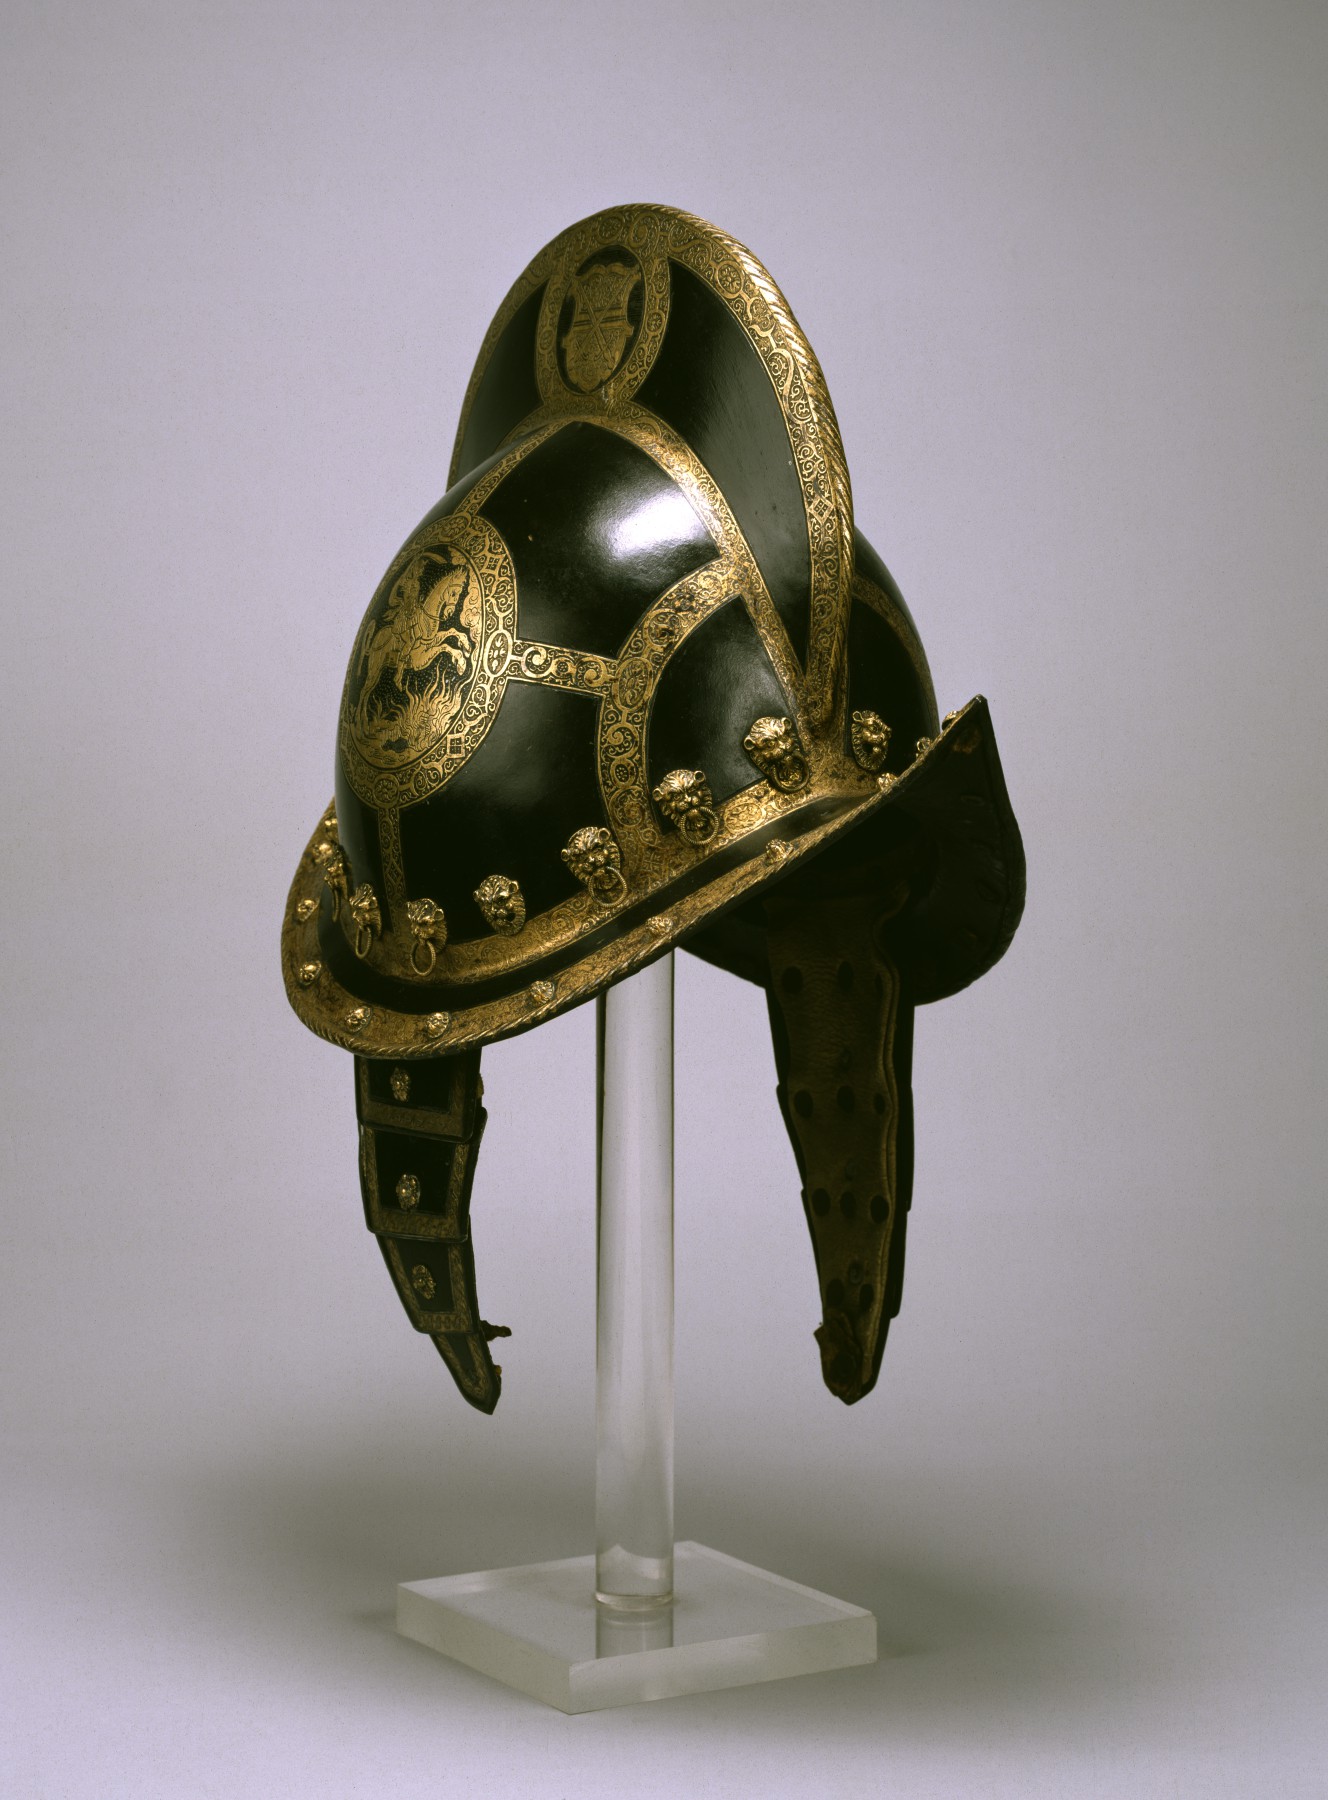 Morion for the Guards of the Elector of Saxony